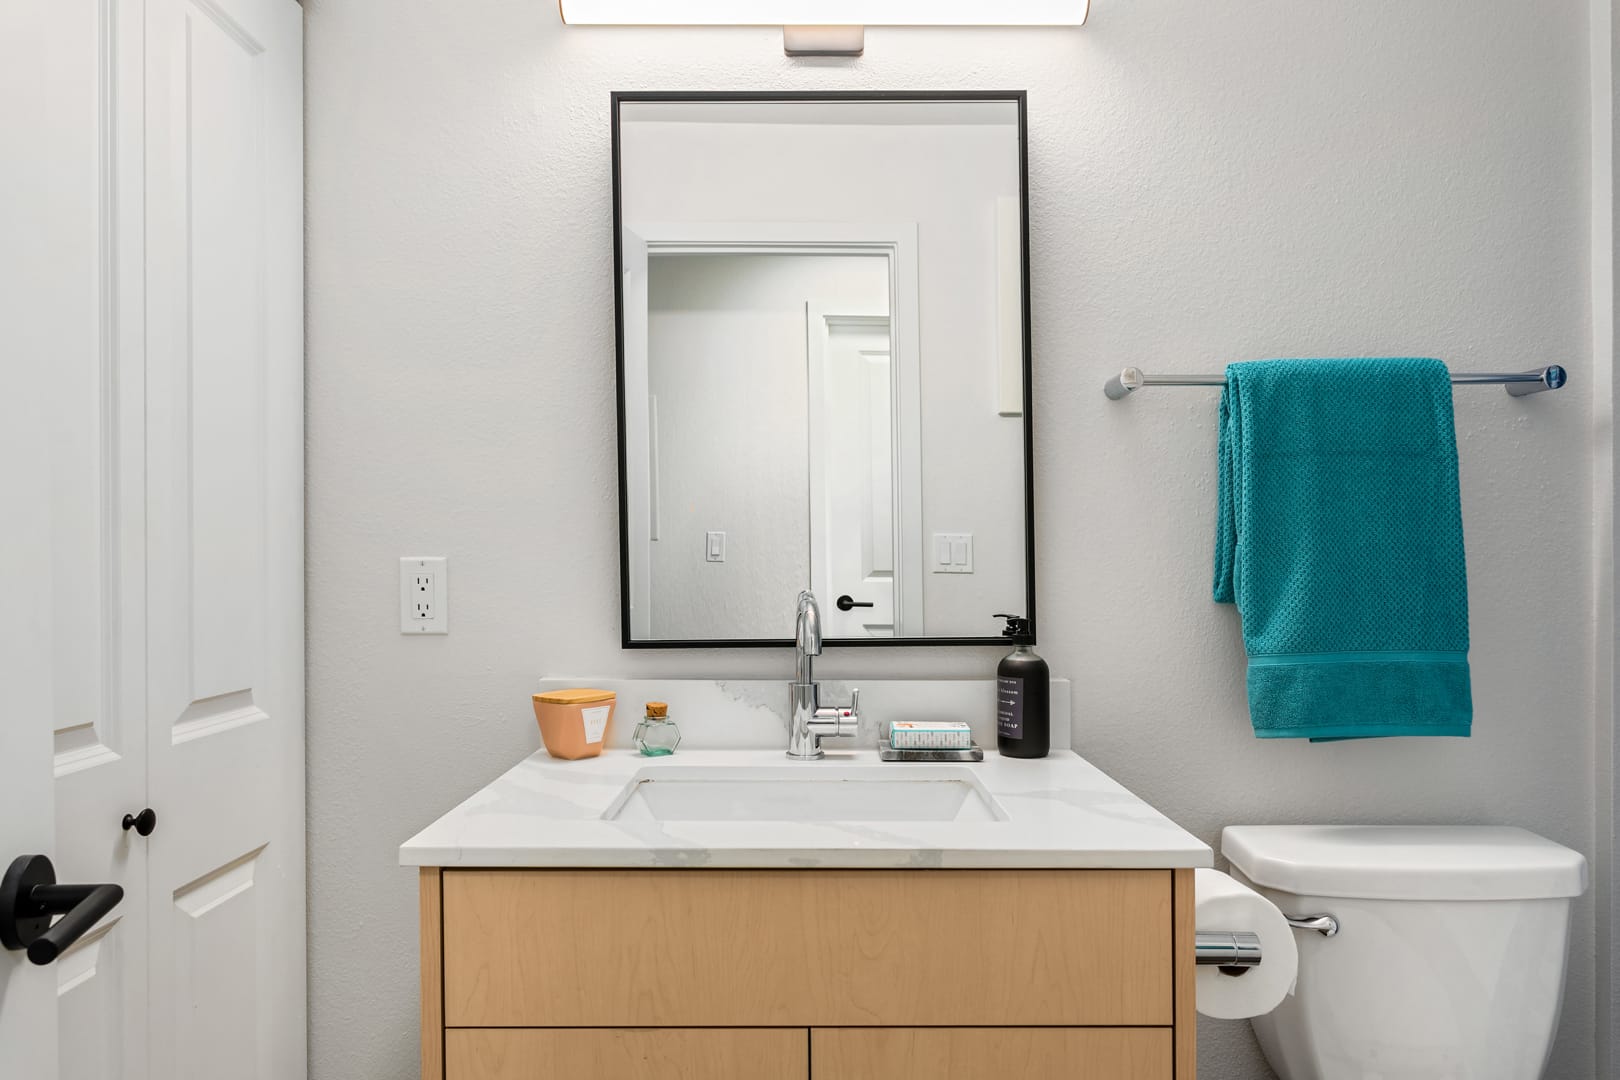 Bathroom with a modern single sink vanity, black trim mirror, and teal towel hanging from a rack